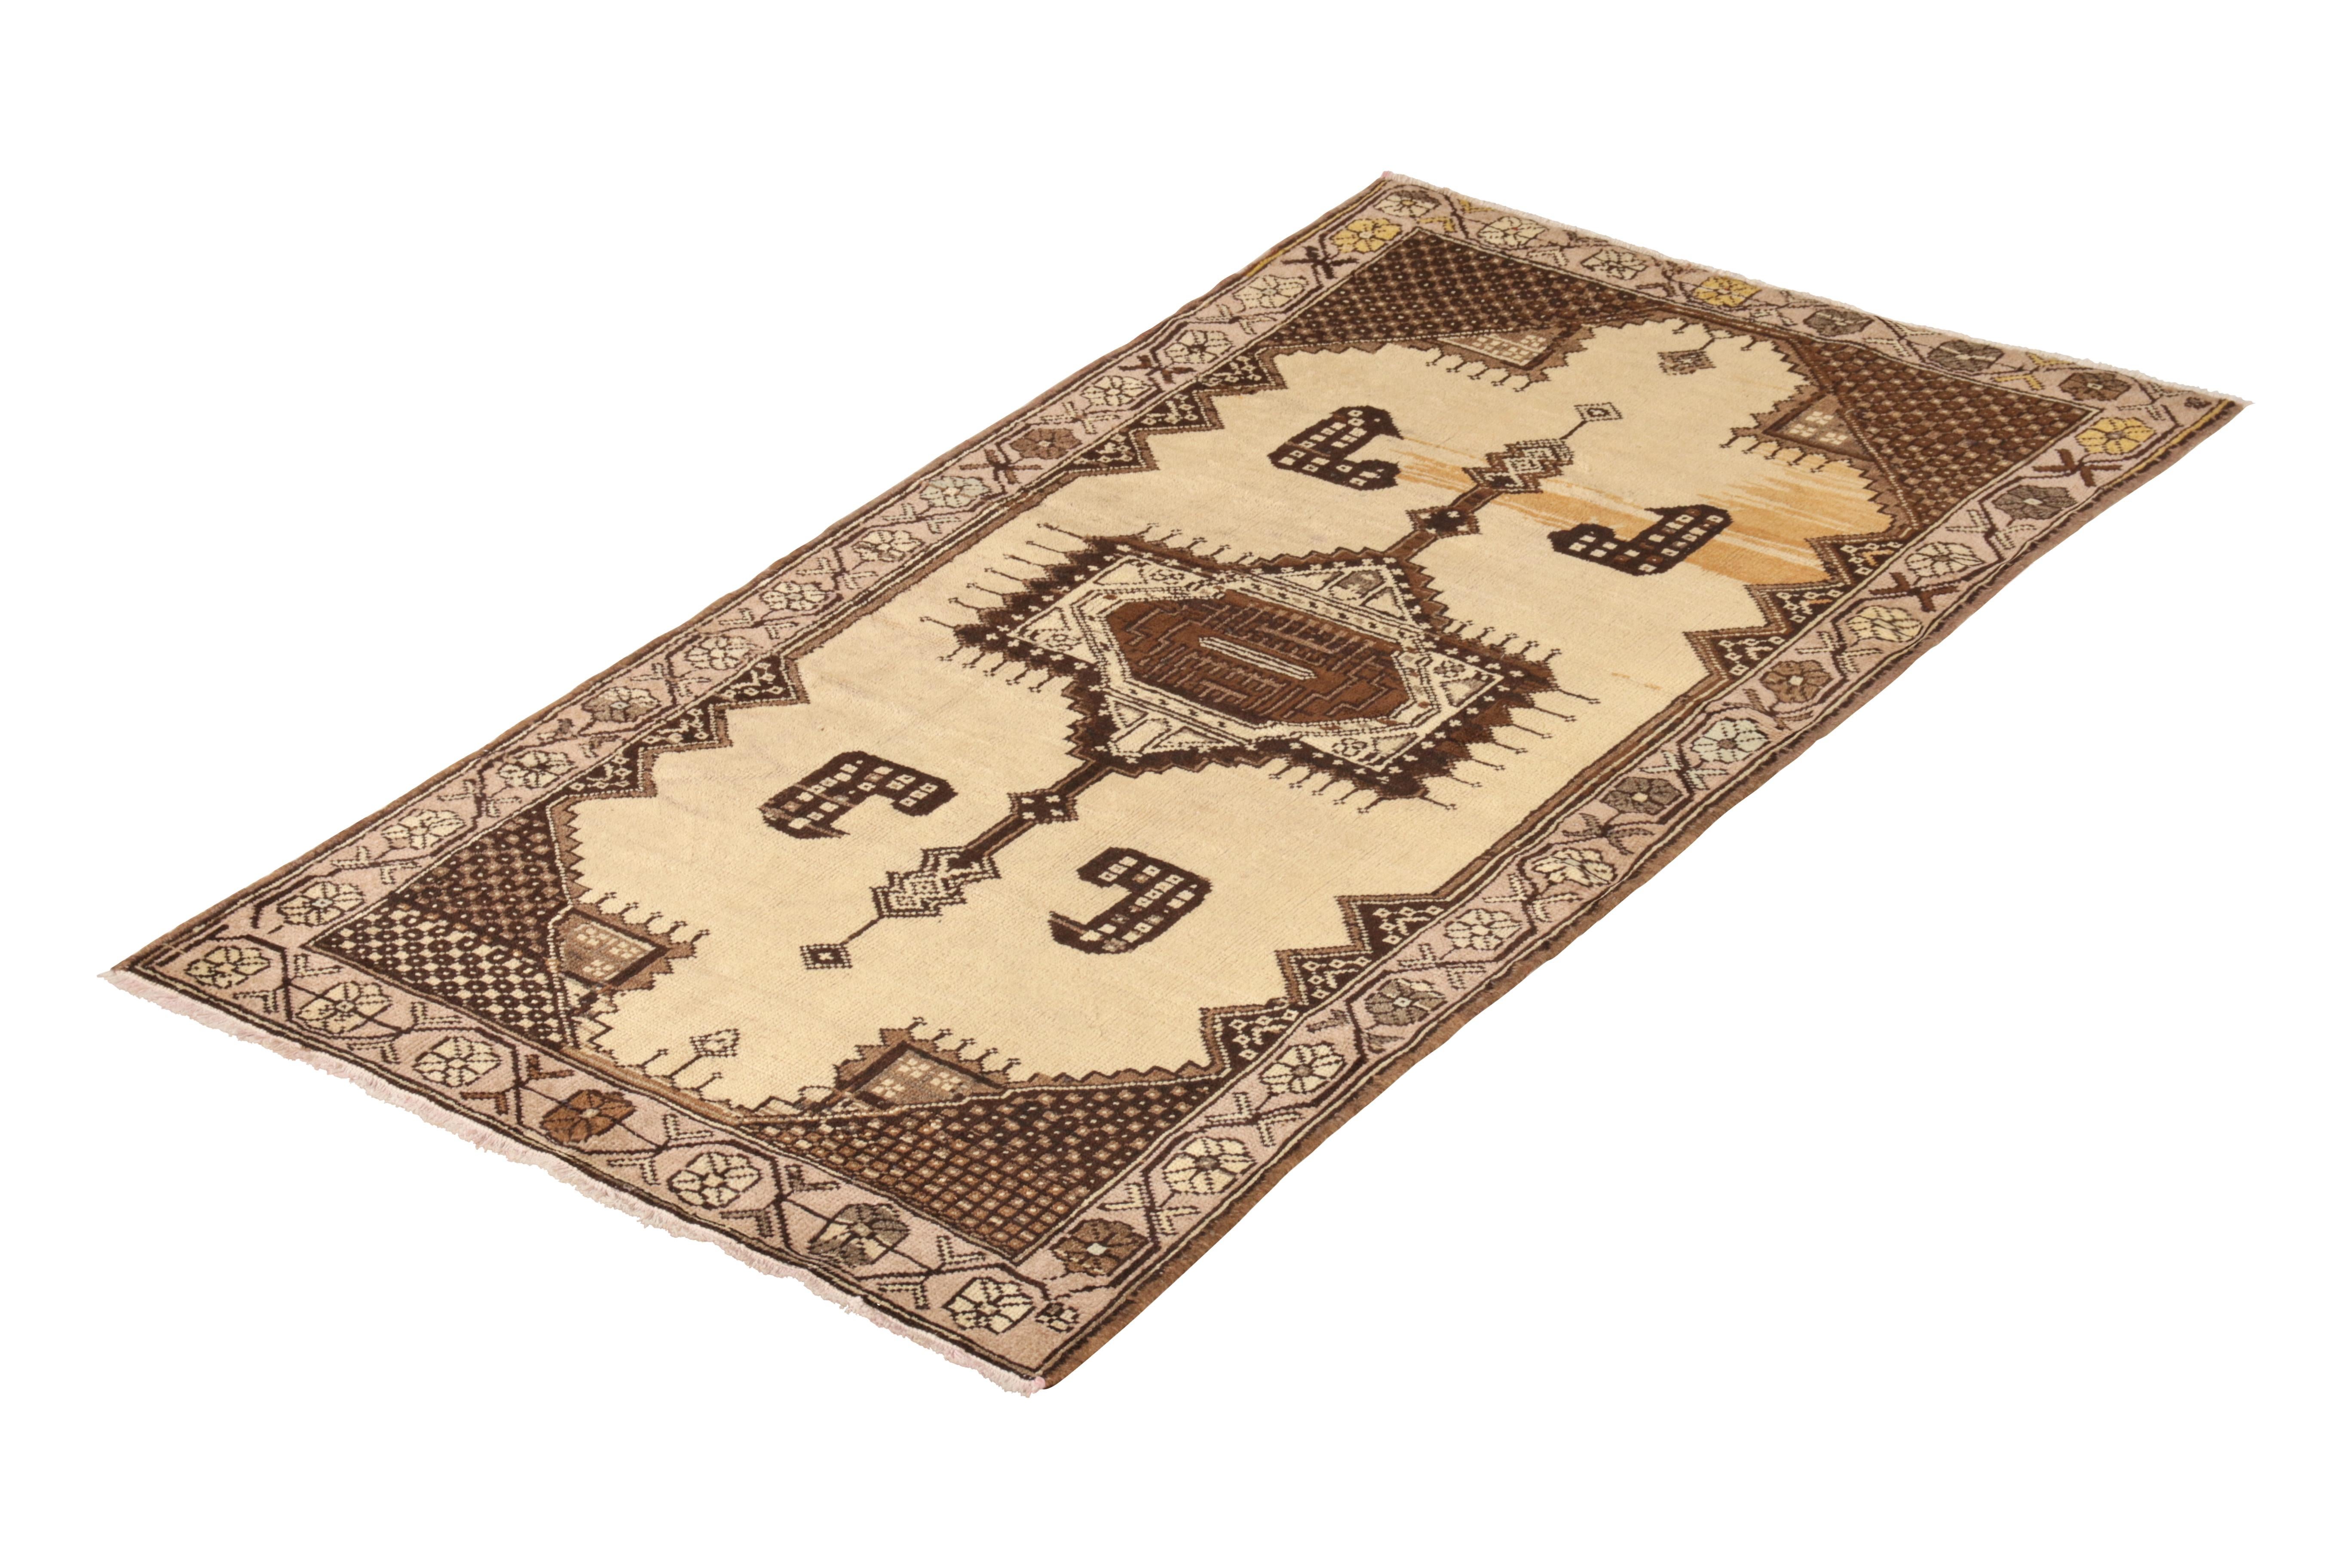 Hand knotted in wool originating from Turkey circa 1950-1960, this vintage Oushak rug connotes a distinguished mid-century runner in a dually appealing gift-sized 3 x 6 size, well-suited in dimensions and sensibility to a wide array of projects